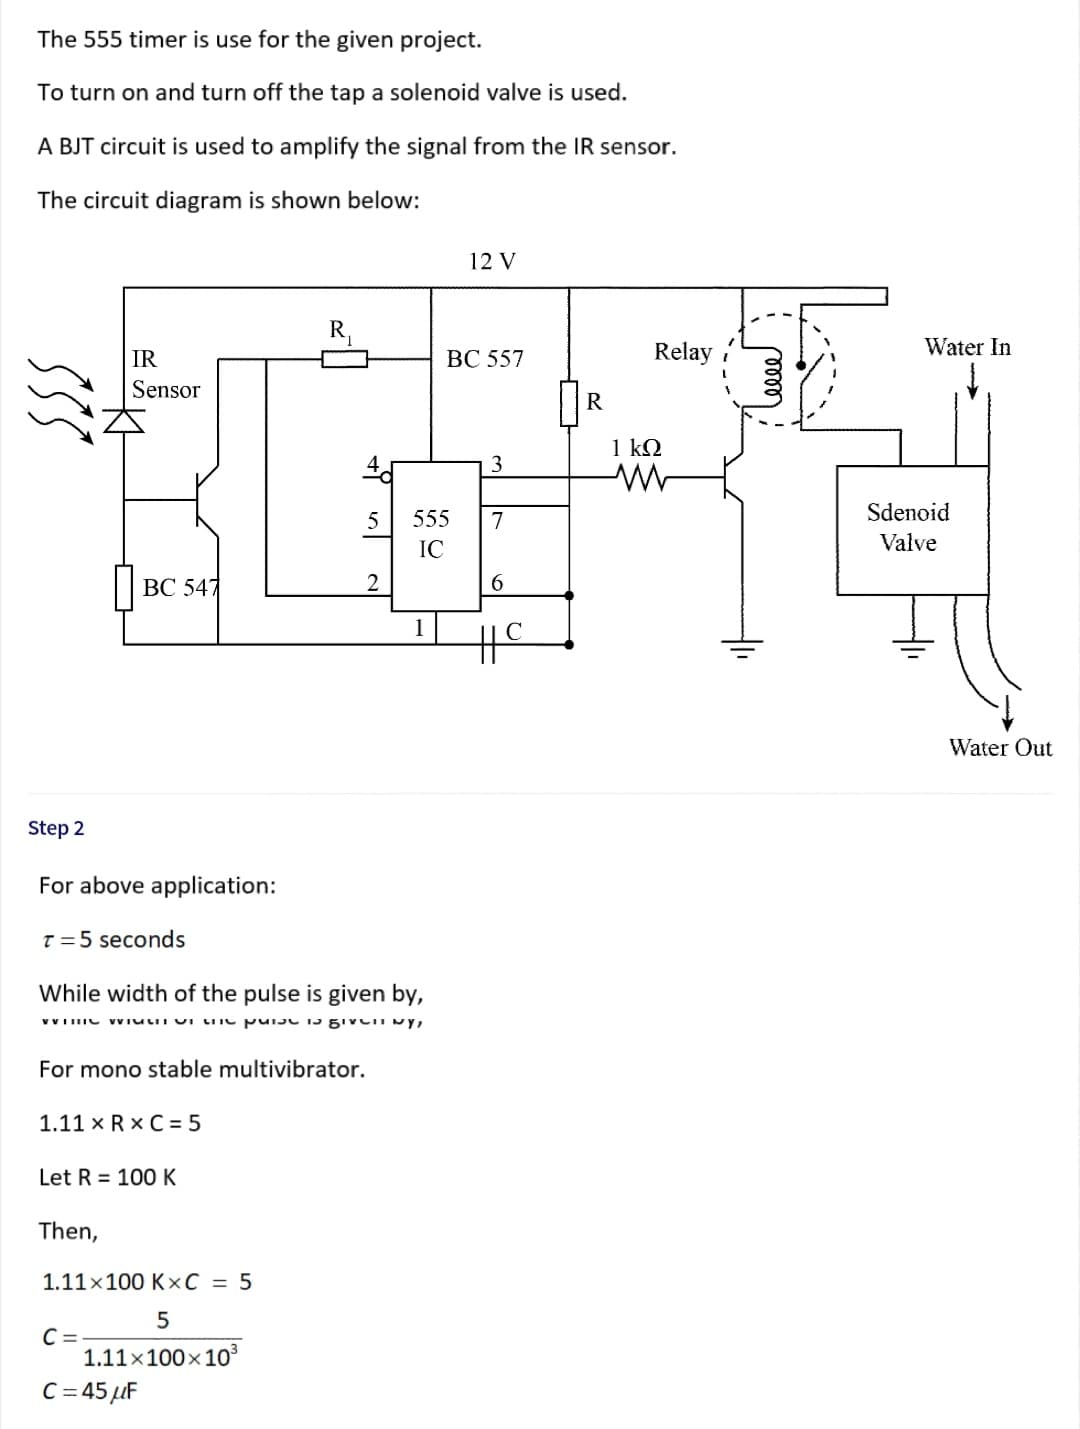 The 555 timer is use for the given project.
To turn on and turn off the tap a solenoid valve is used.
A BJT circuit is used to amplify the signal from the IR sensor.
The circuit diagram is shown below:
12 V
